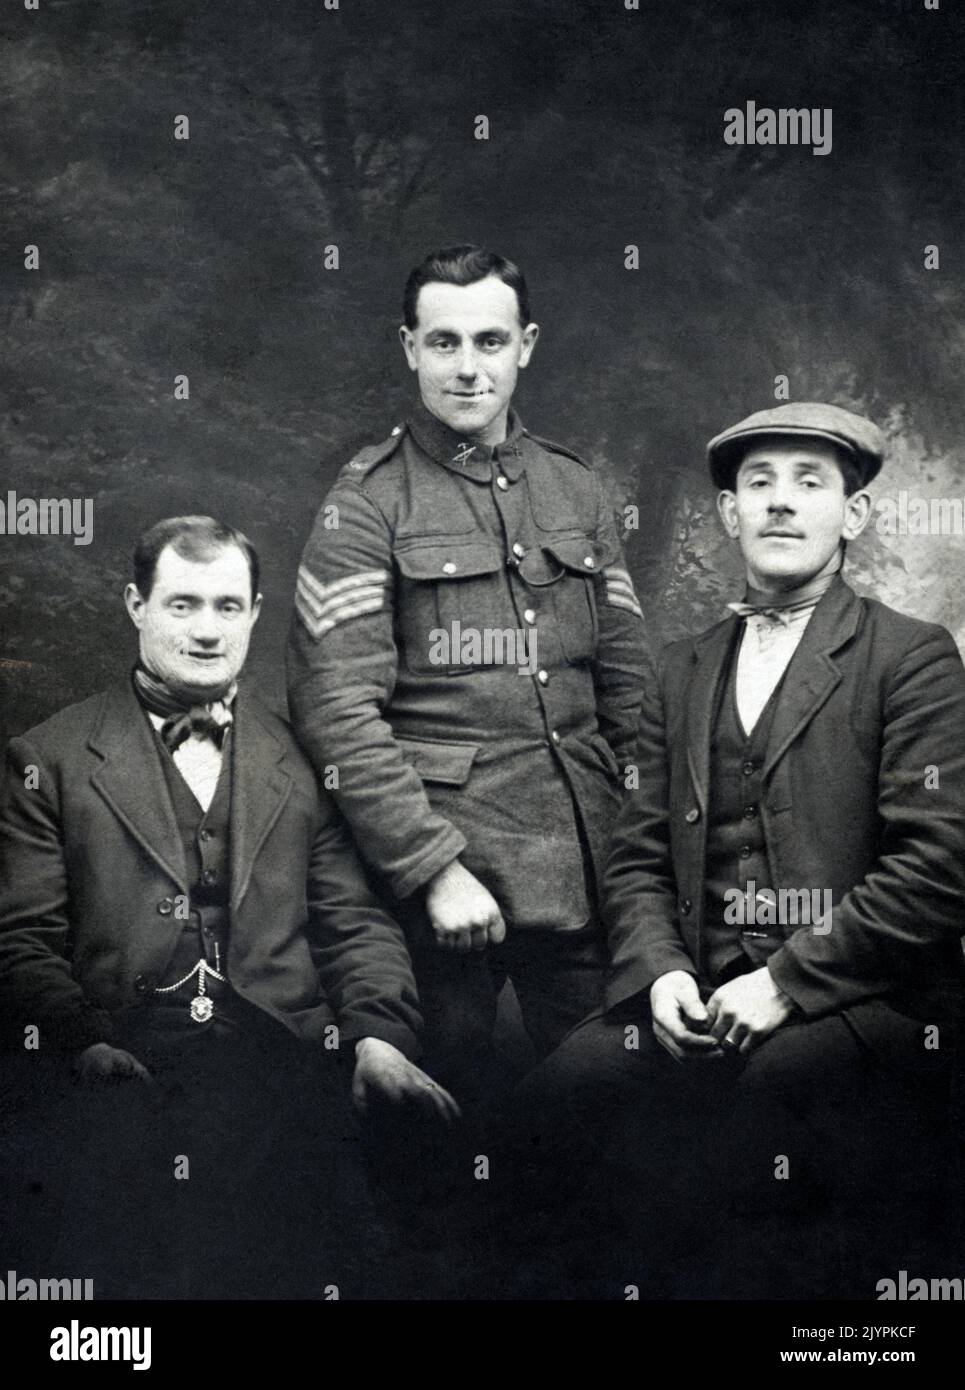 A portrait of a First World War British soldier, a sargeant in a Labour Battalion of an infantry regiment, alongside two civilians. Stock Photo